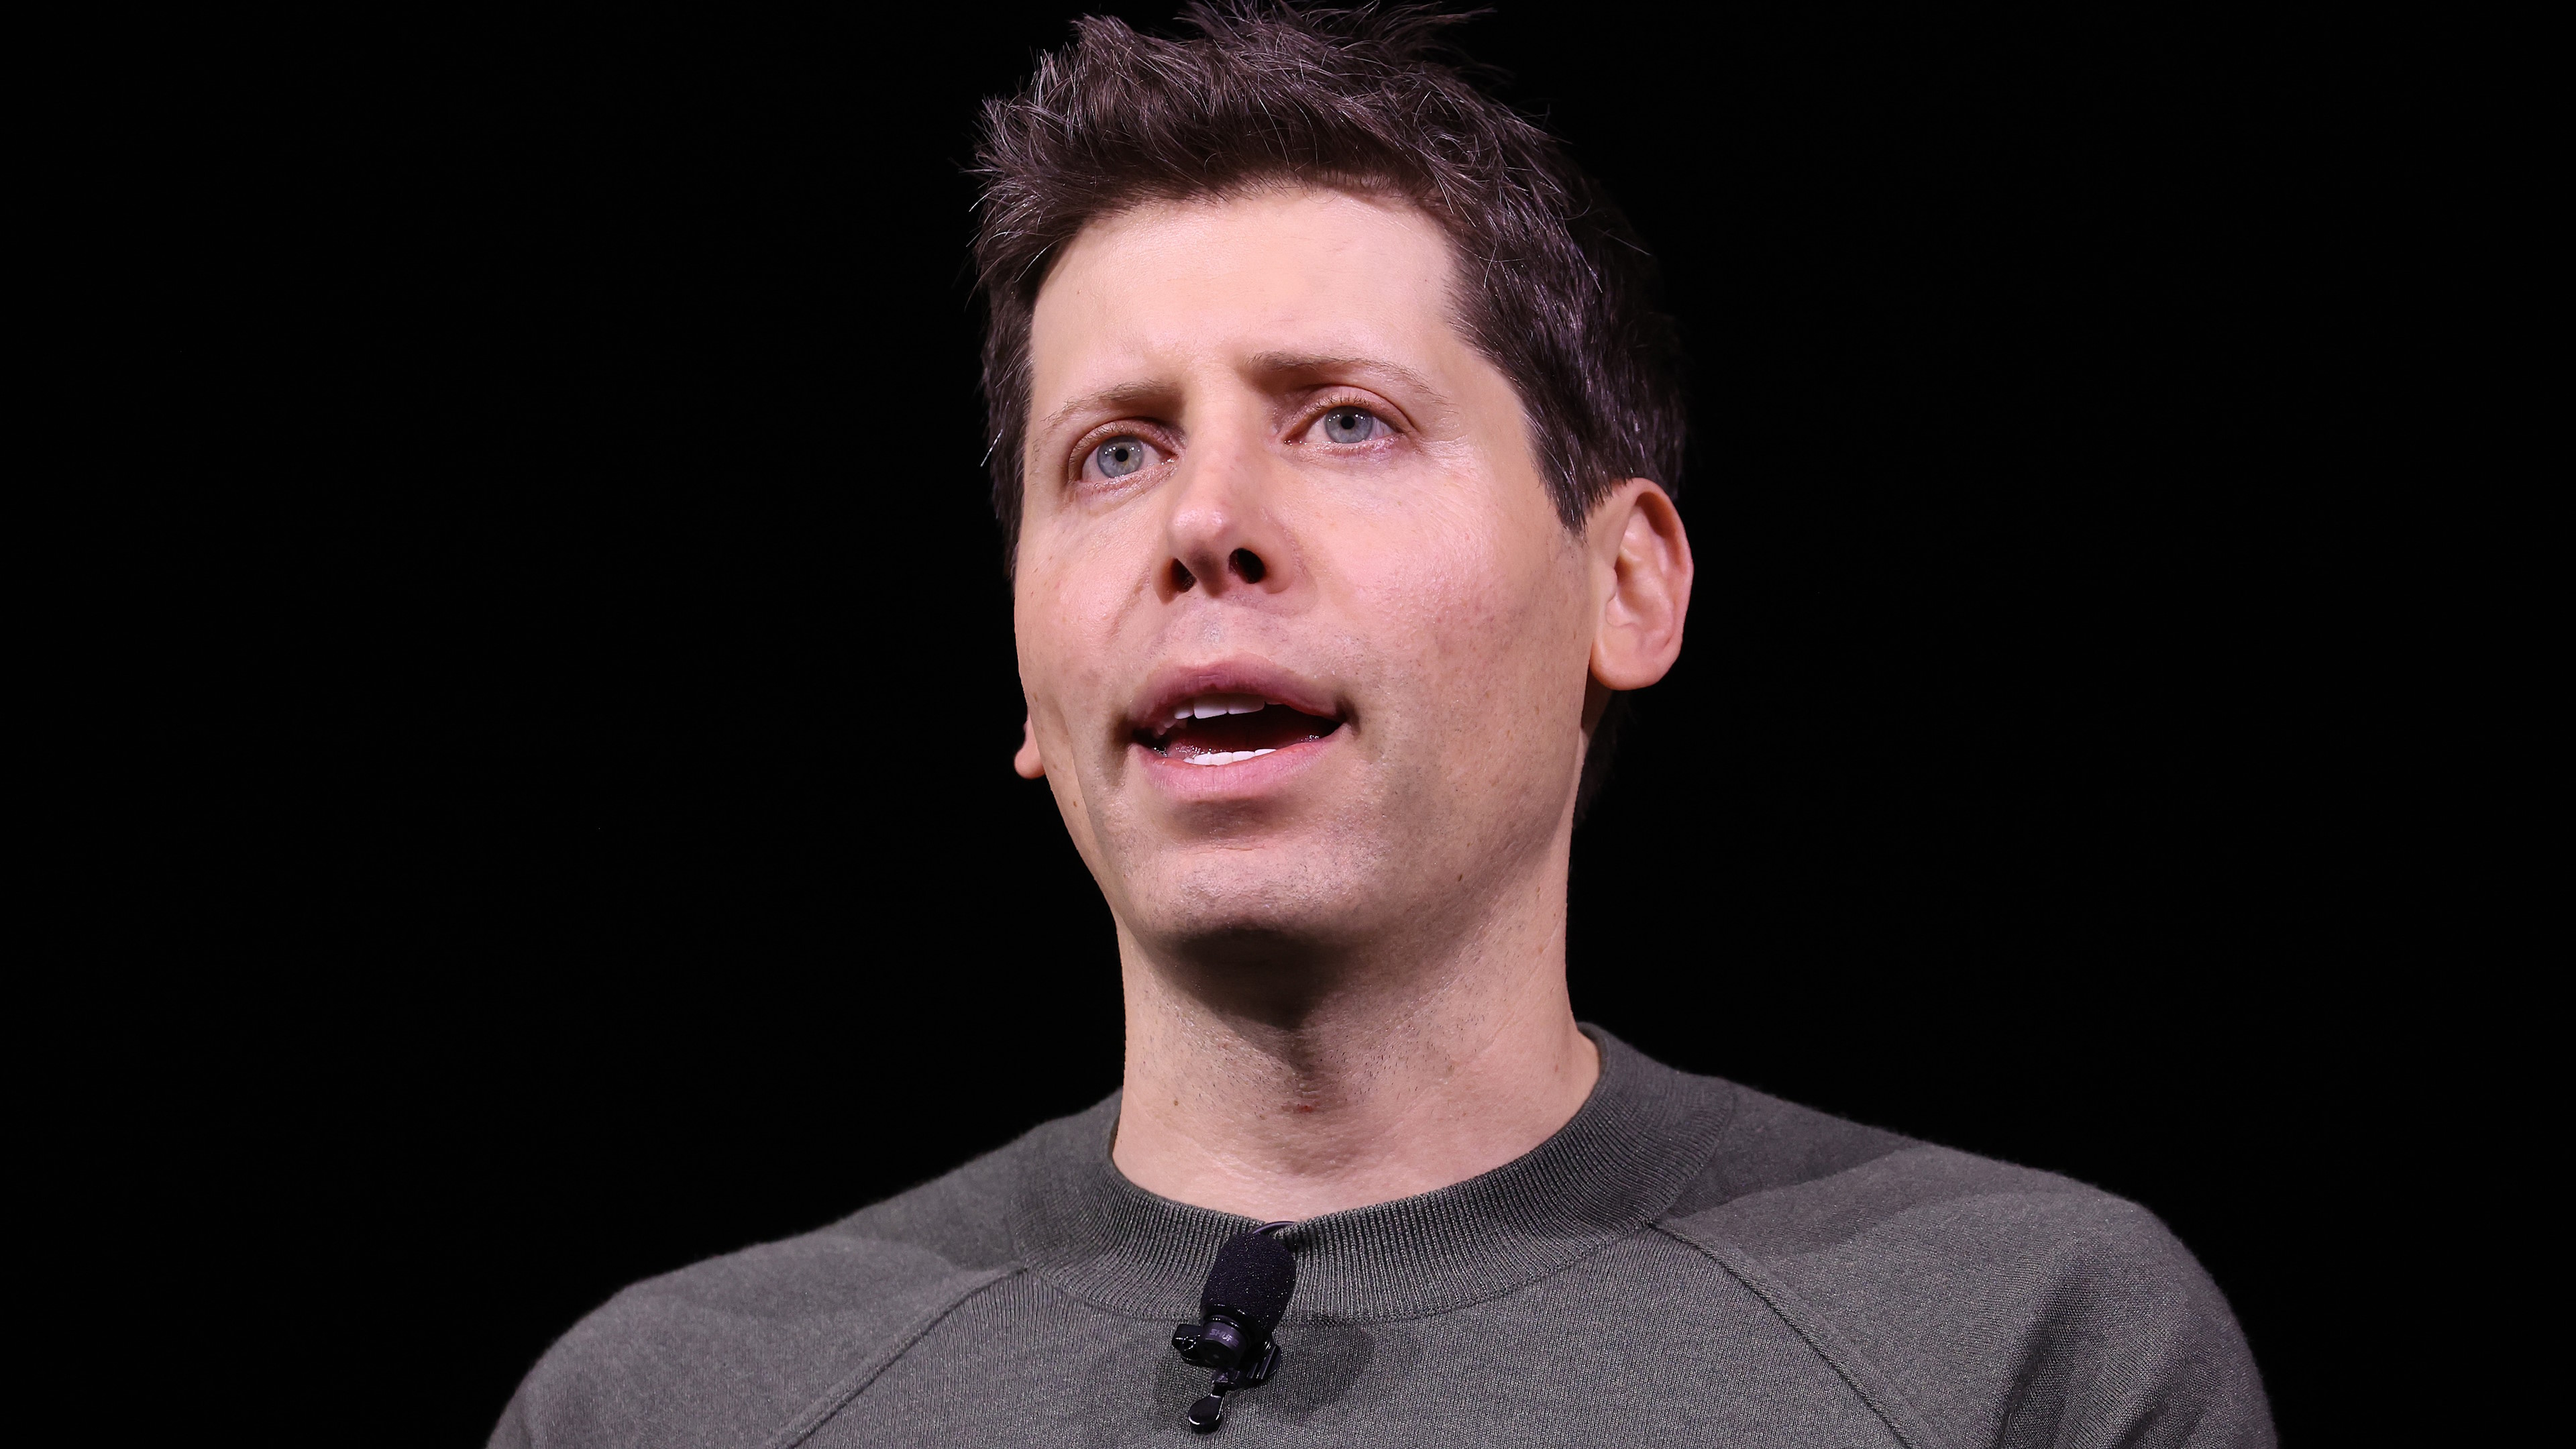 SAN FRANCISCO, CALIFORNIA - NOVEMBER 06: OpenAI CEO Sam Altman speaks during the OpenAI DevDay event on November 06, 2023 in San Francisco, California. Altman delivered the keynote address at the first-ever Open AI DevDay conference.(Photo by Justin Sullivan/Getty Images)